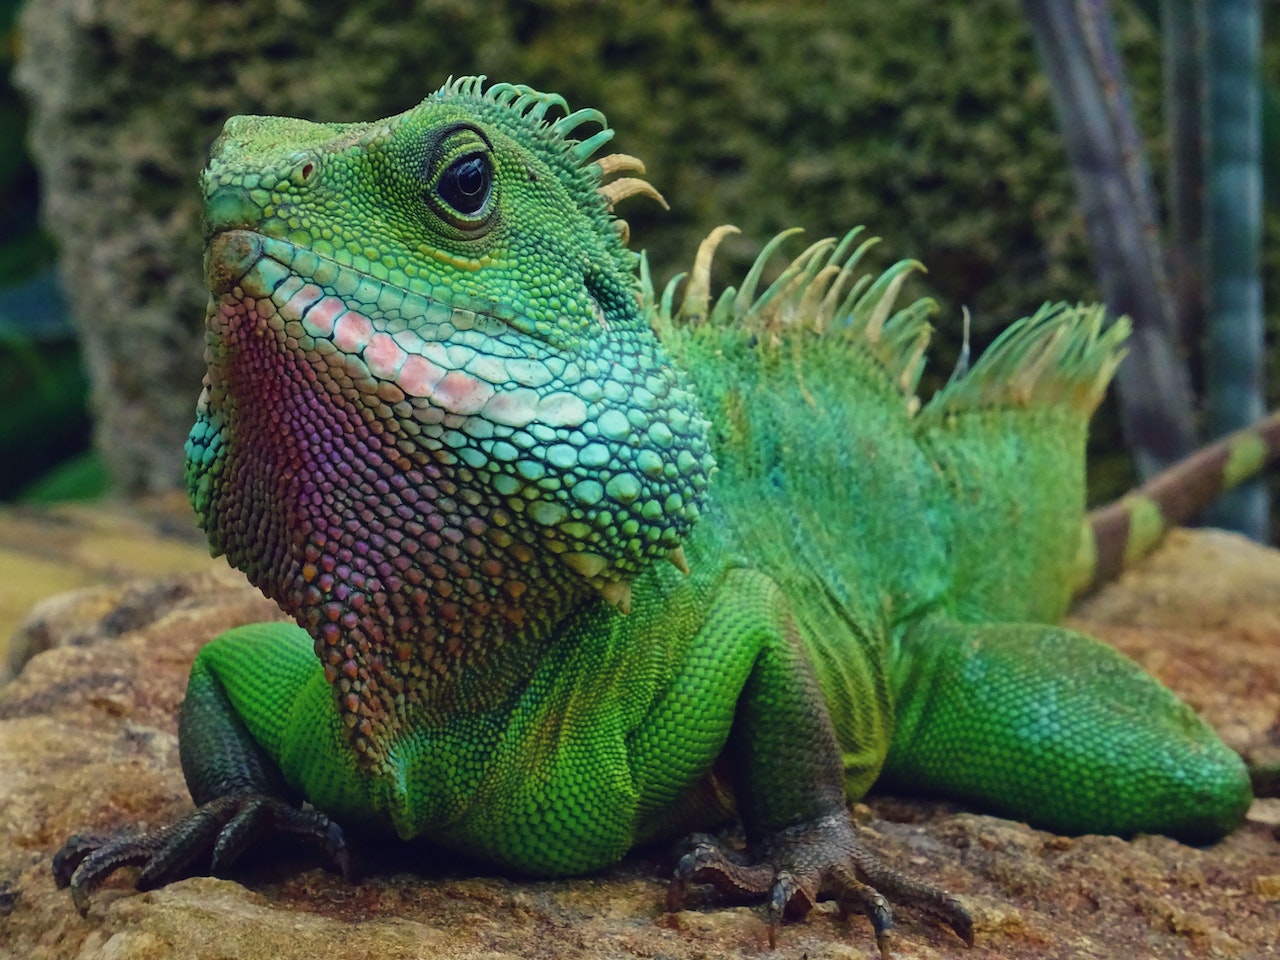 Do Iguanas Need Water? How Iguanas Drink Water And Everything You Need To Know